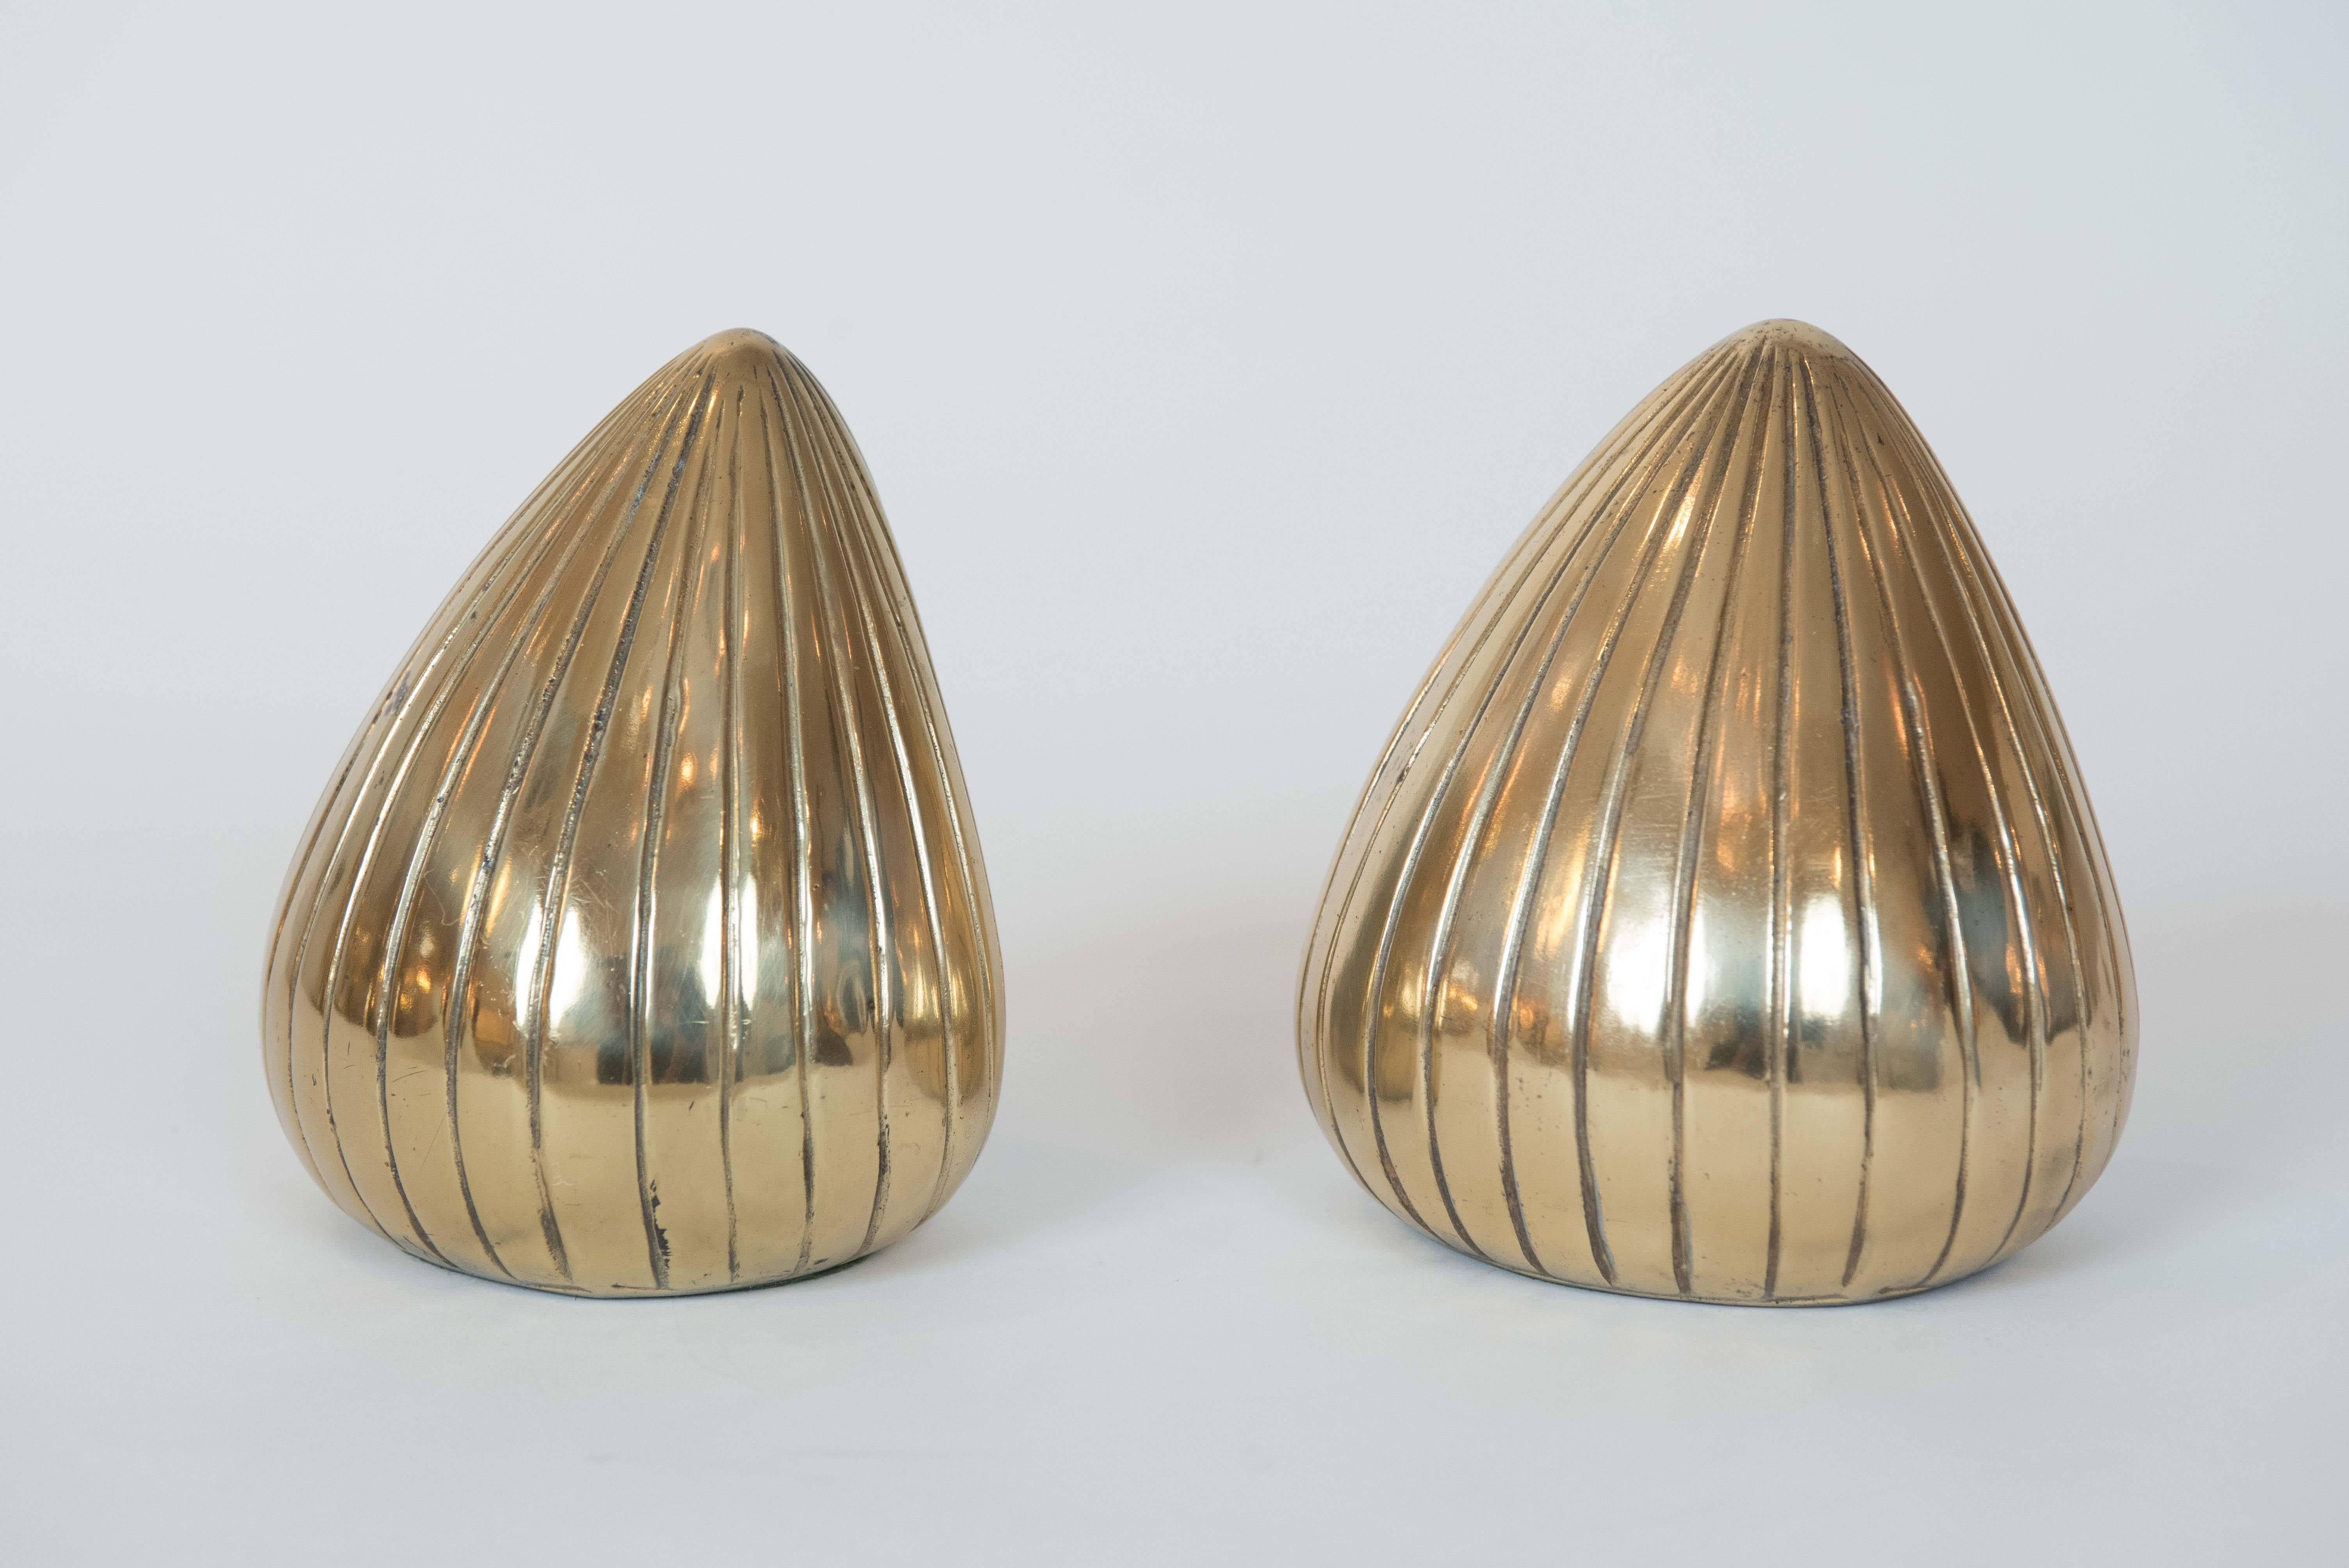 Mid-20th Century Pair of Brass Bookends by Ben Seibel for Jenfredware, New York